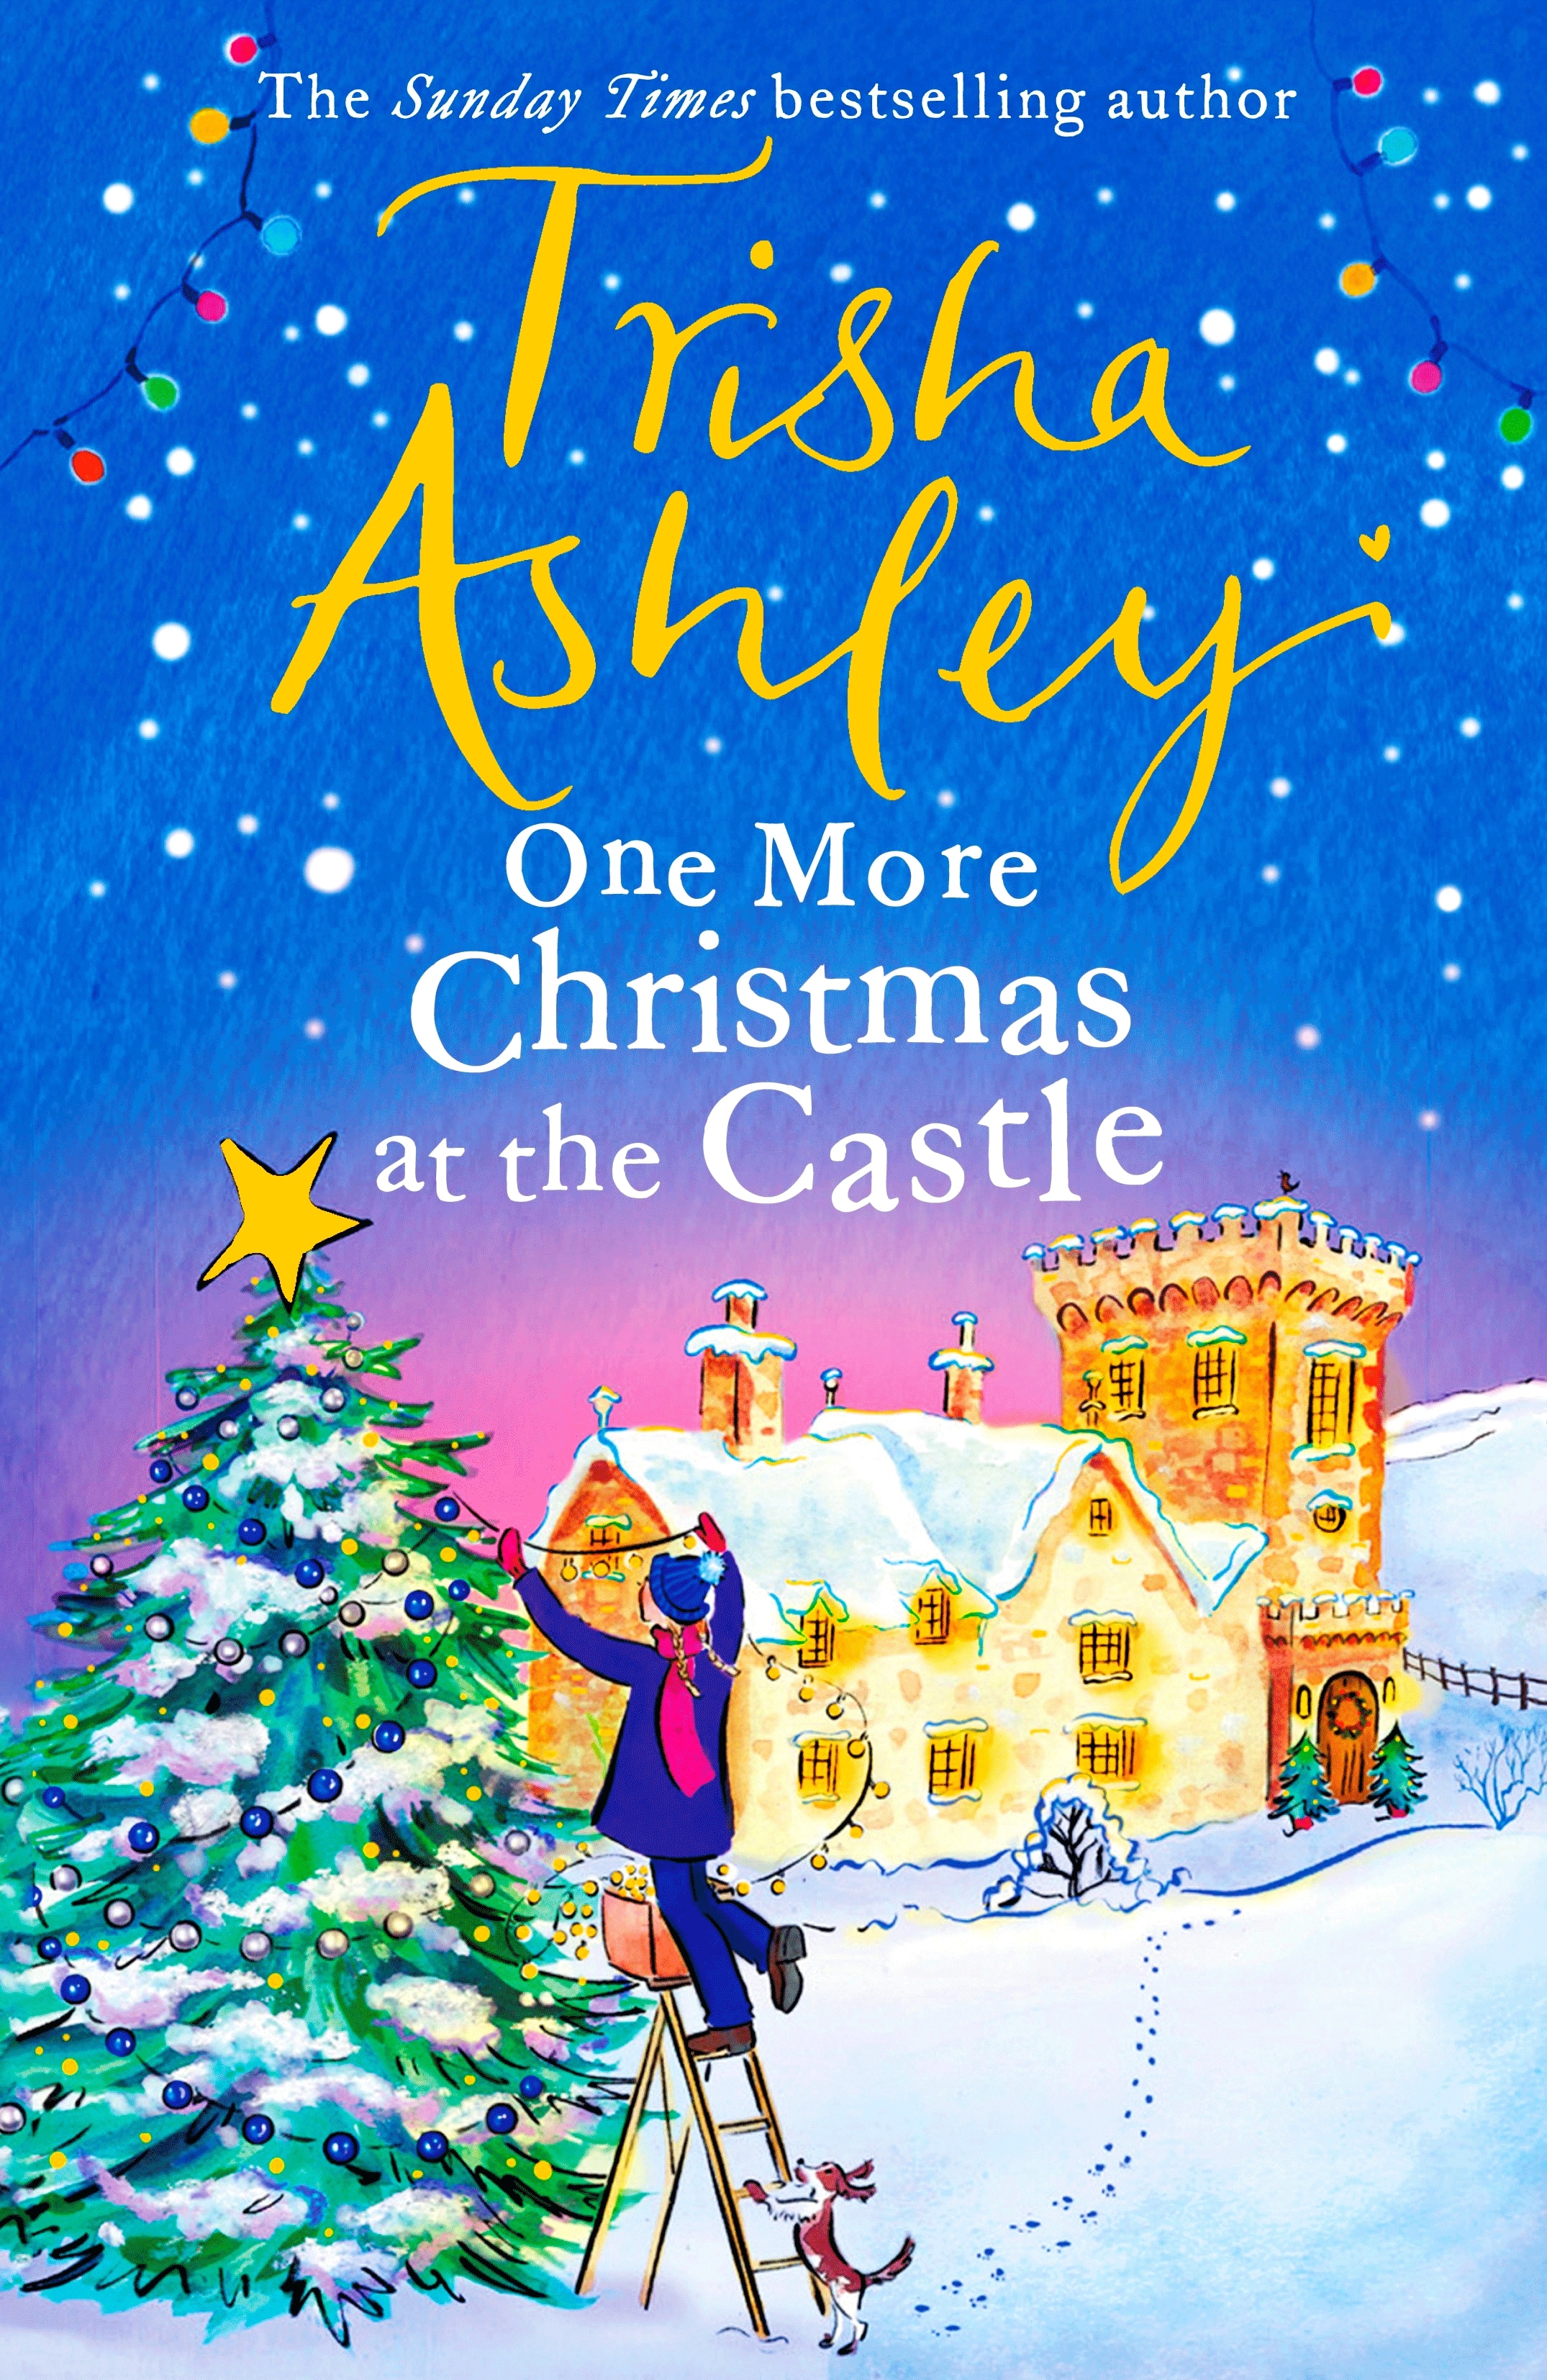 Book “One More Christmas at the Castle” by Trisha Ashley — November 11, 2021